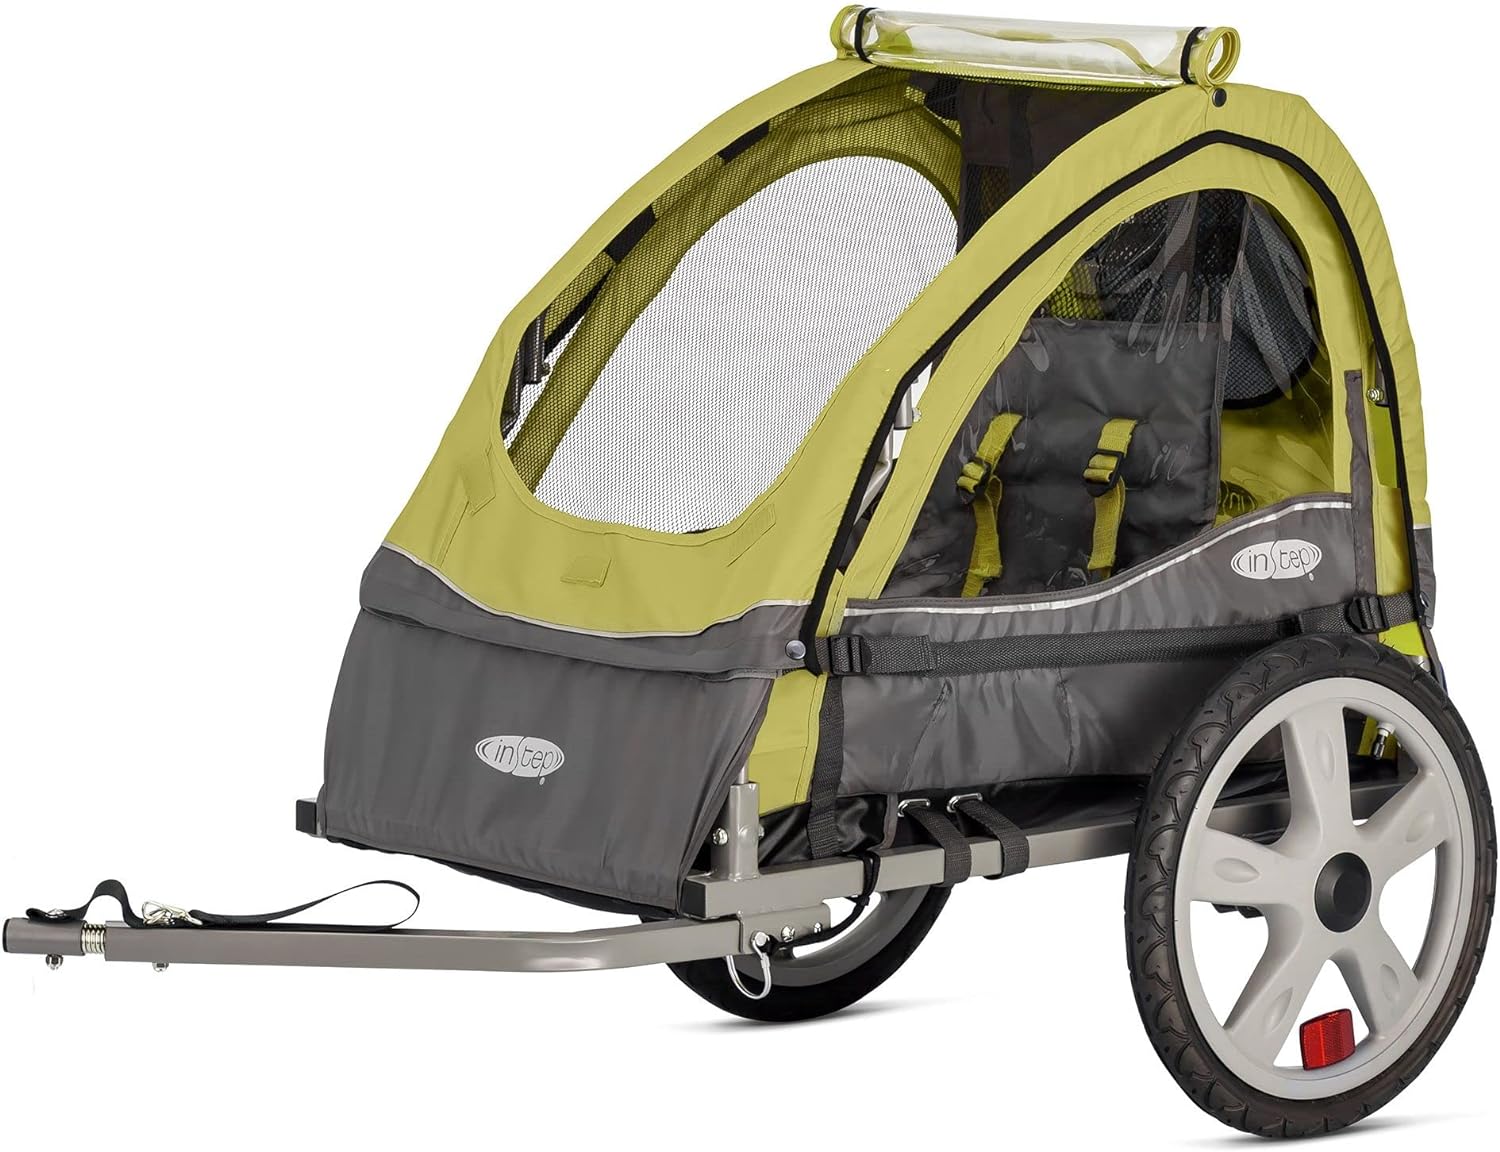 Best Bike Trailer: Top 5 Picks for Your Cycling Adventures